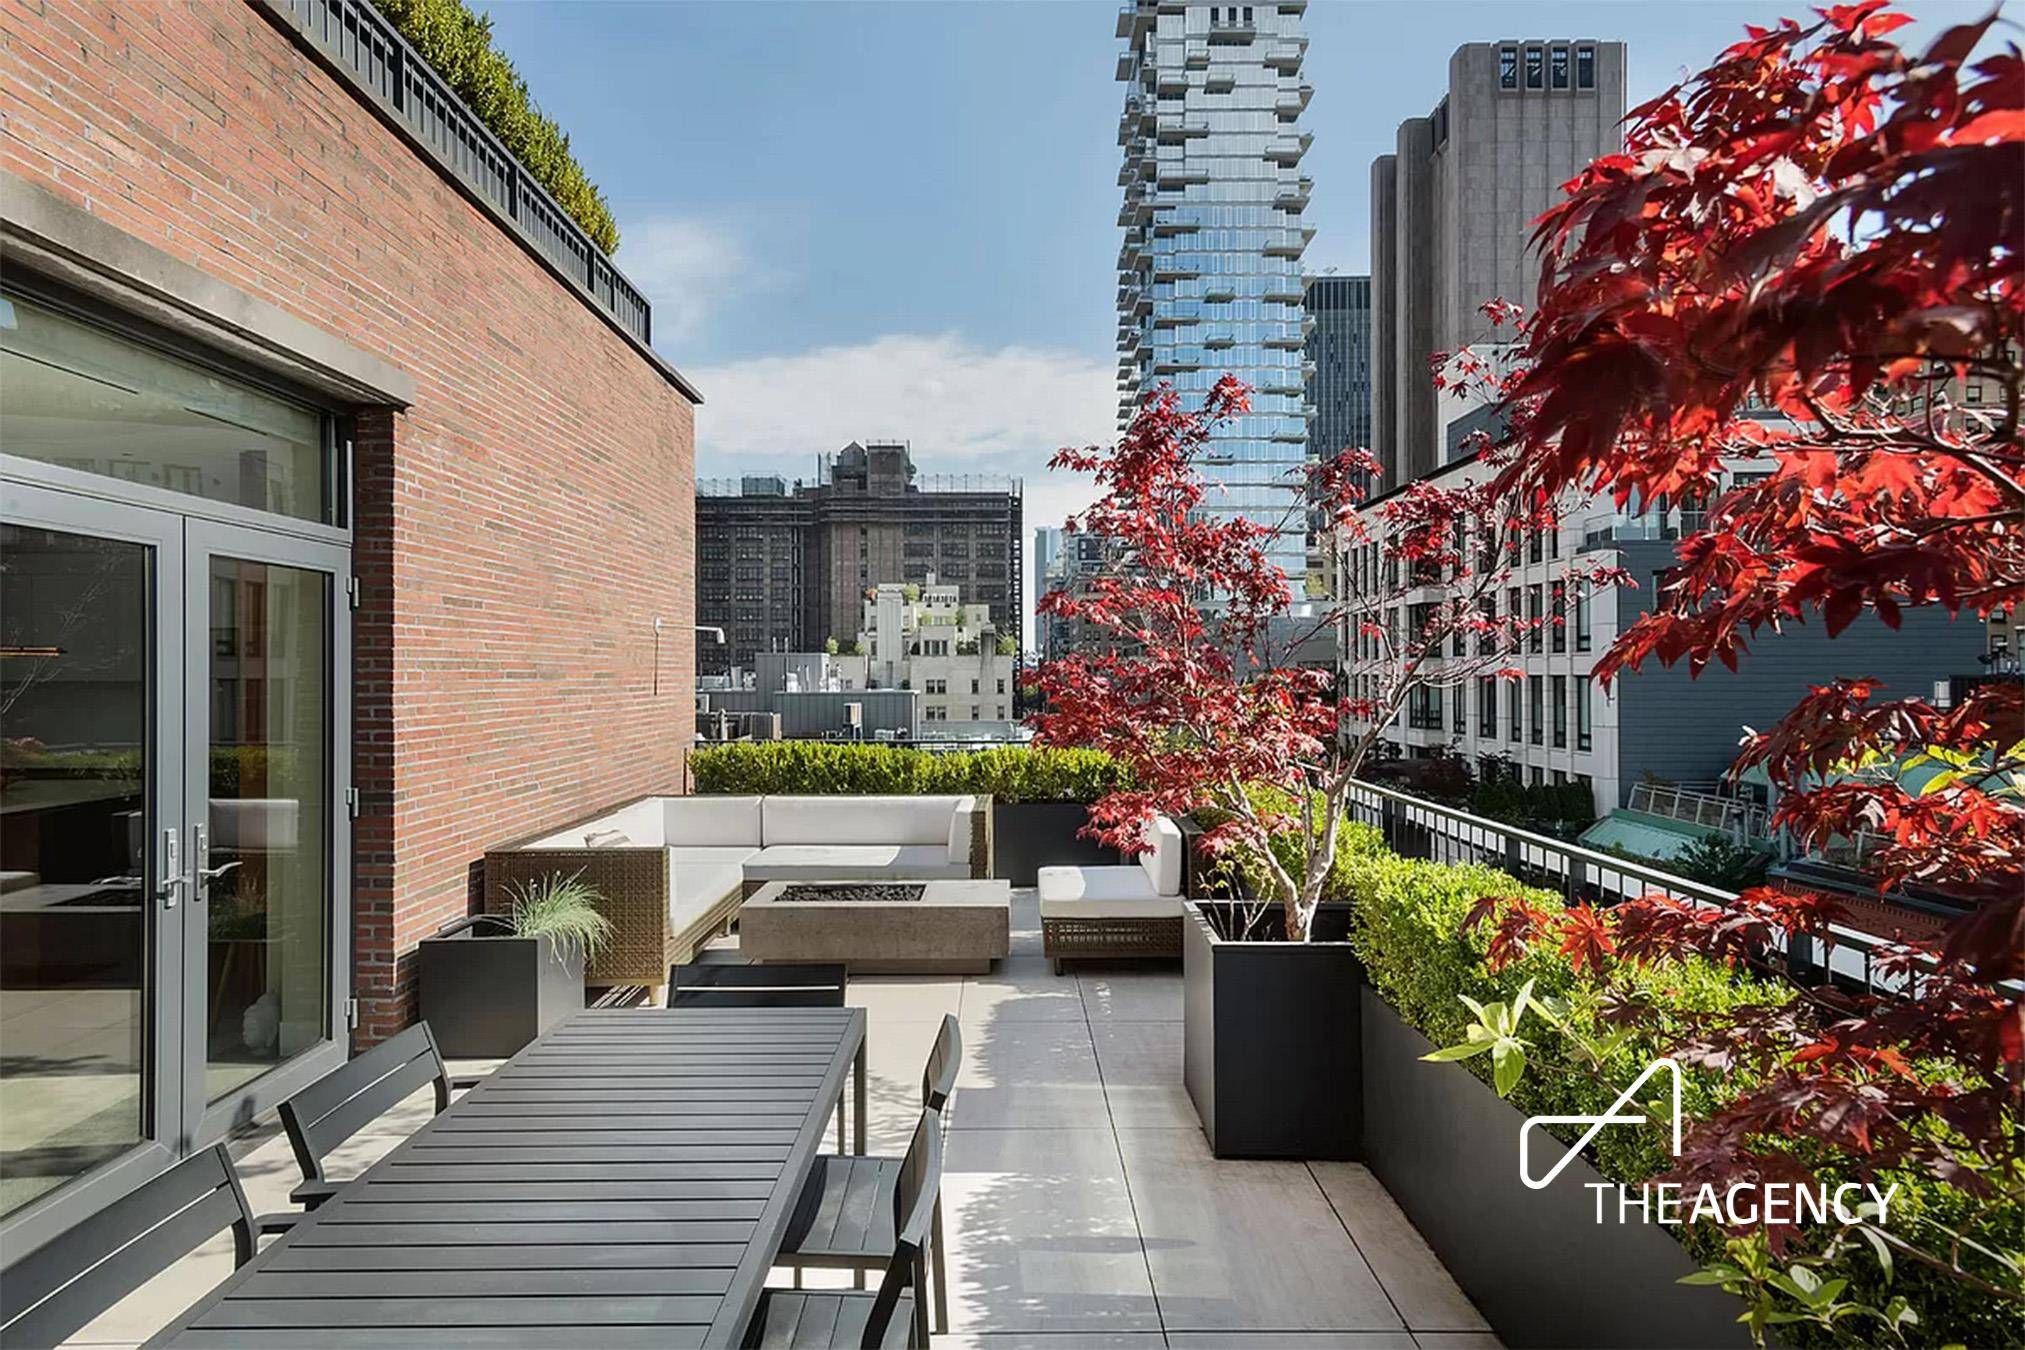 Situated on the upper 3 levels of 15 Leonard Street, this opulent Tribeca triplex penthouse boasts 4, 574 SF of interior living space with 5 bedrooms, 5 full and 2 ...